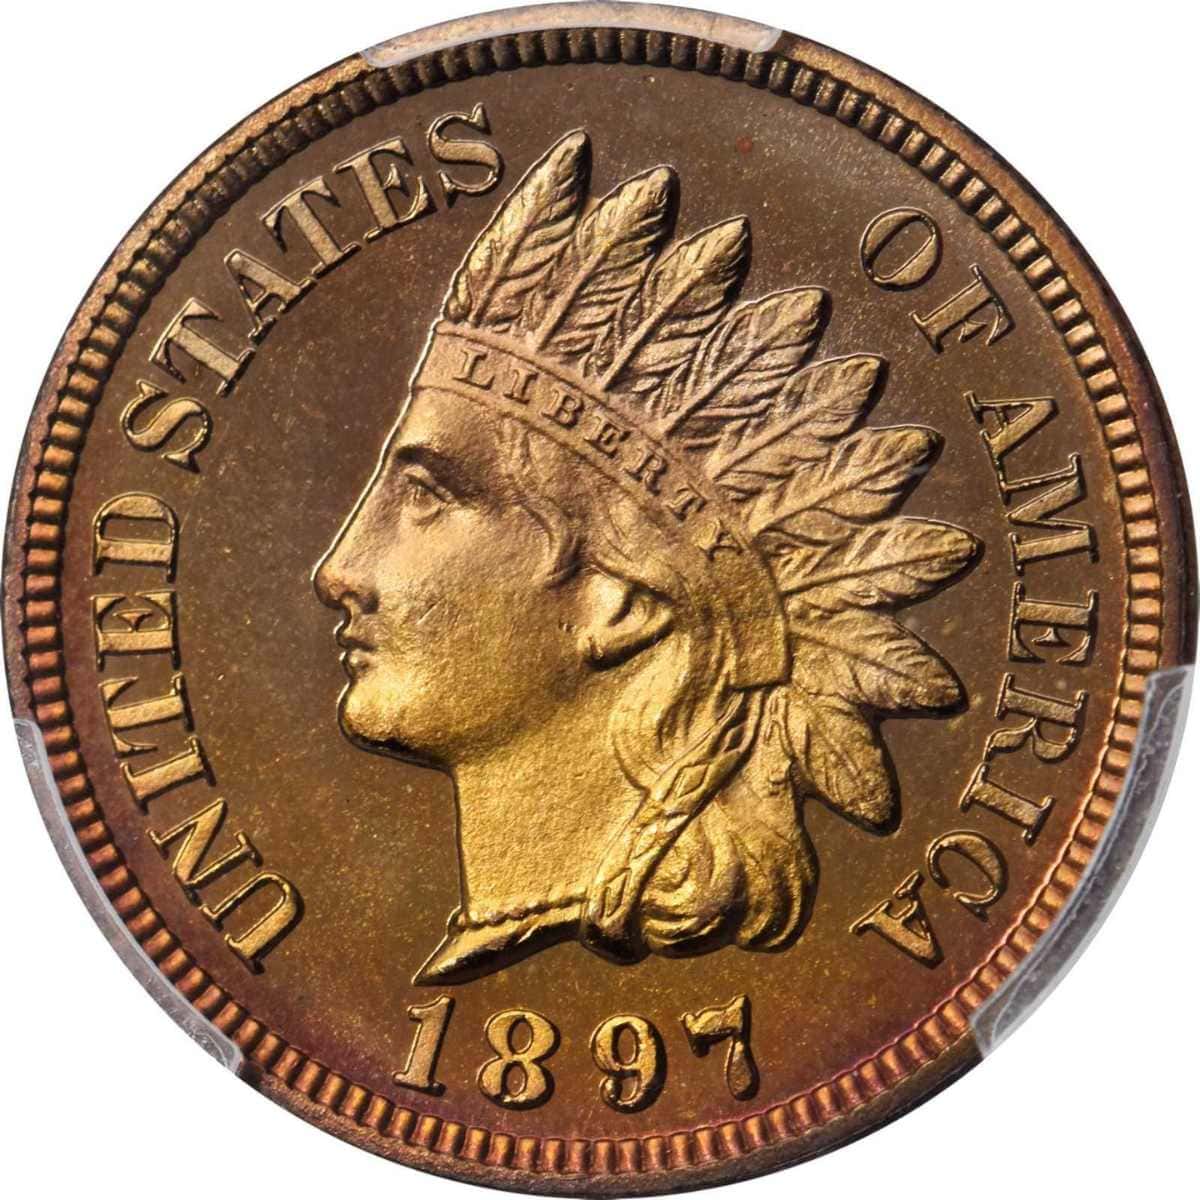 1897 Proof Indian Head Penny Sold for $108,000